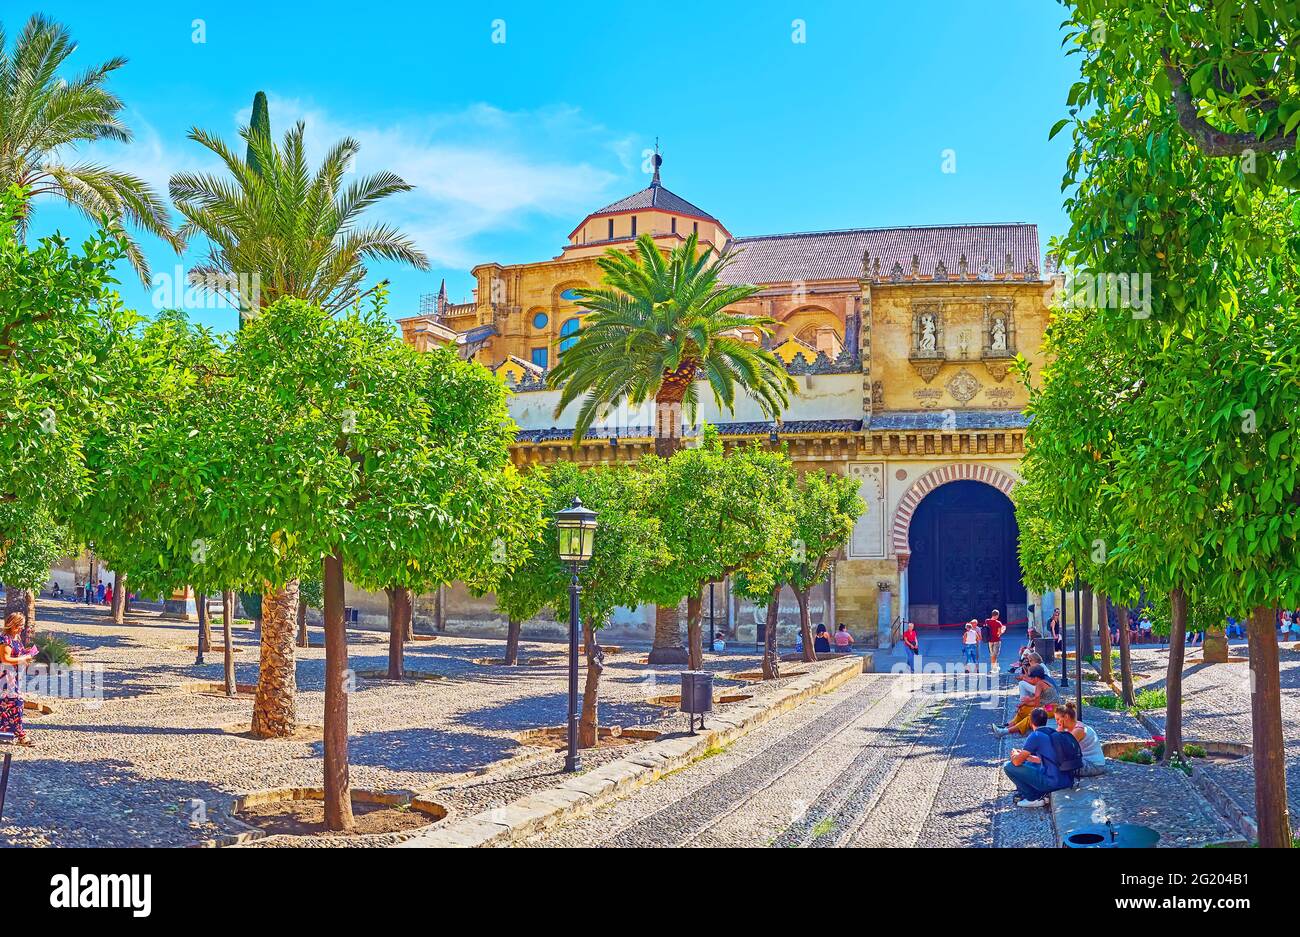 CORDOBA, SPAIN - SEP 30, 2019: The lush garden of Courtyard of the Oranges and the scenic medieval Puerta de las Palmas gate of Mezquita, on Sep 30 in Stock Photo